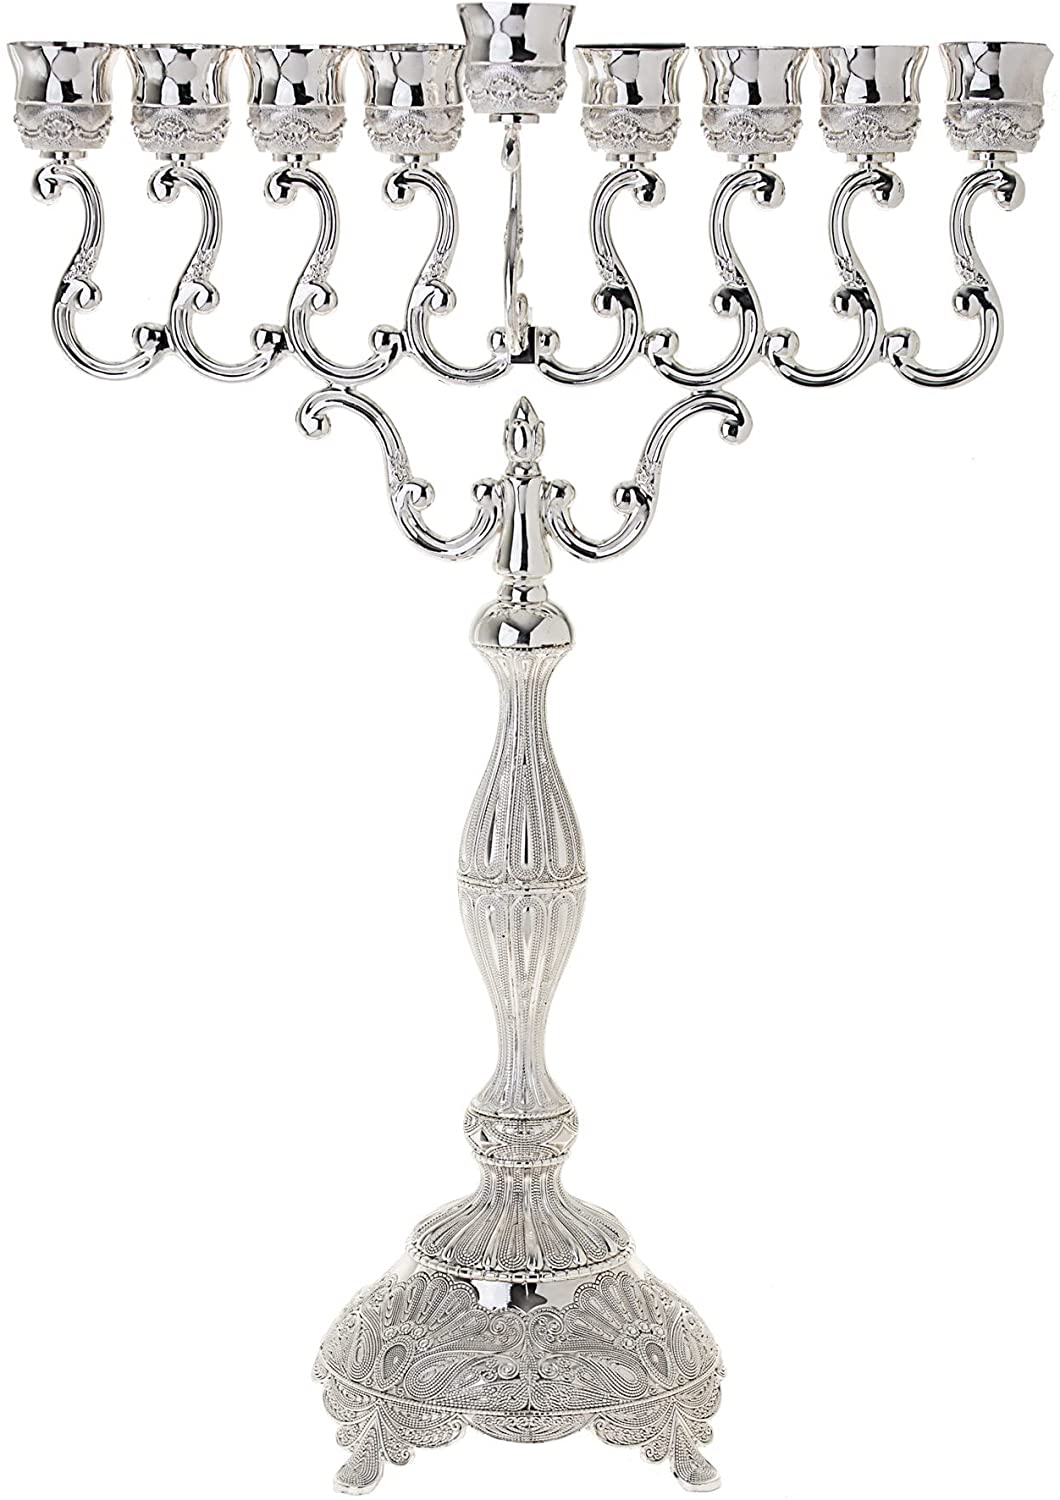 (D) Judaica Silver Plated Menorah with a Tiny Decorated Base for Chanukah 27''